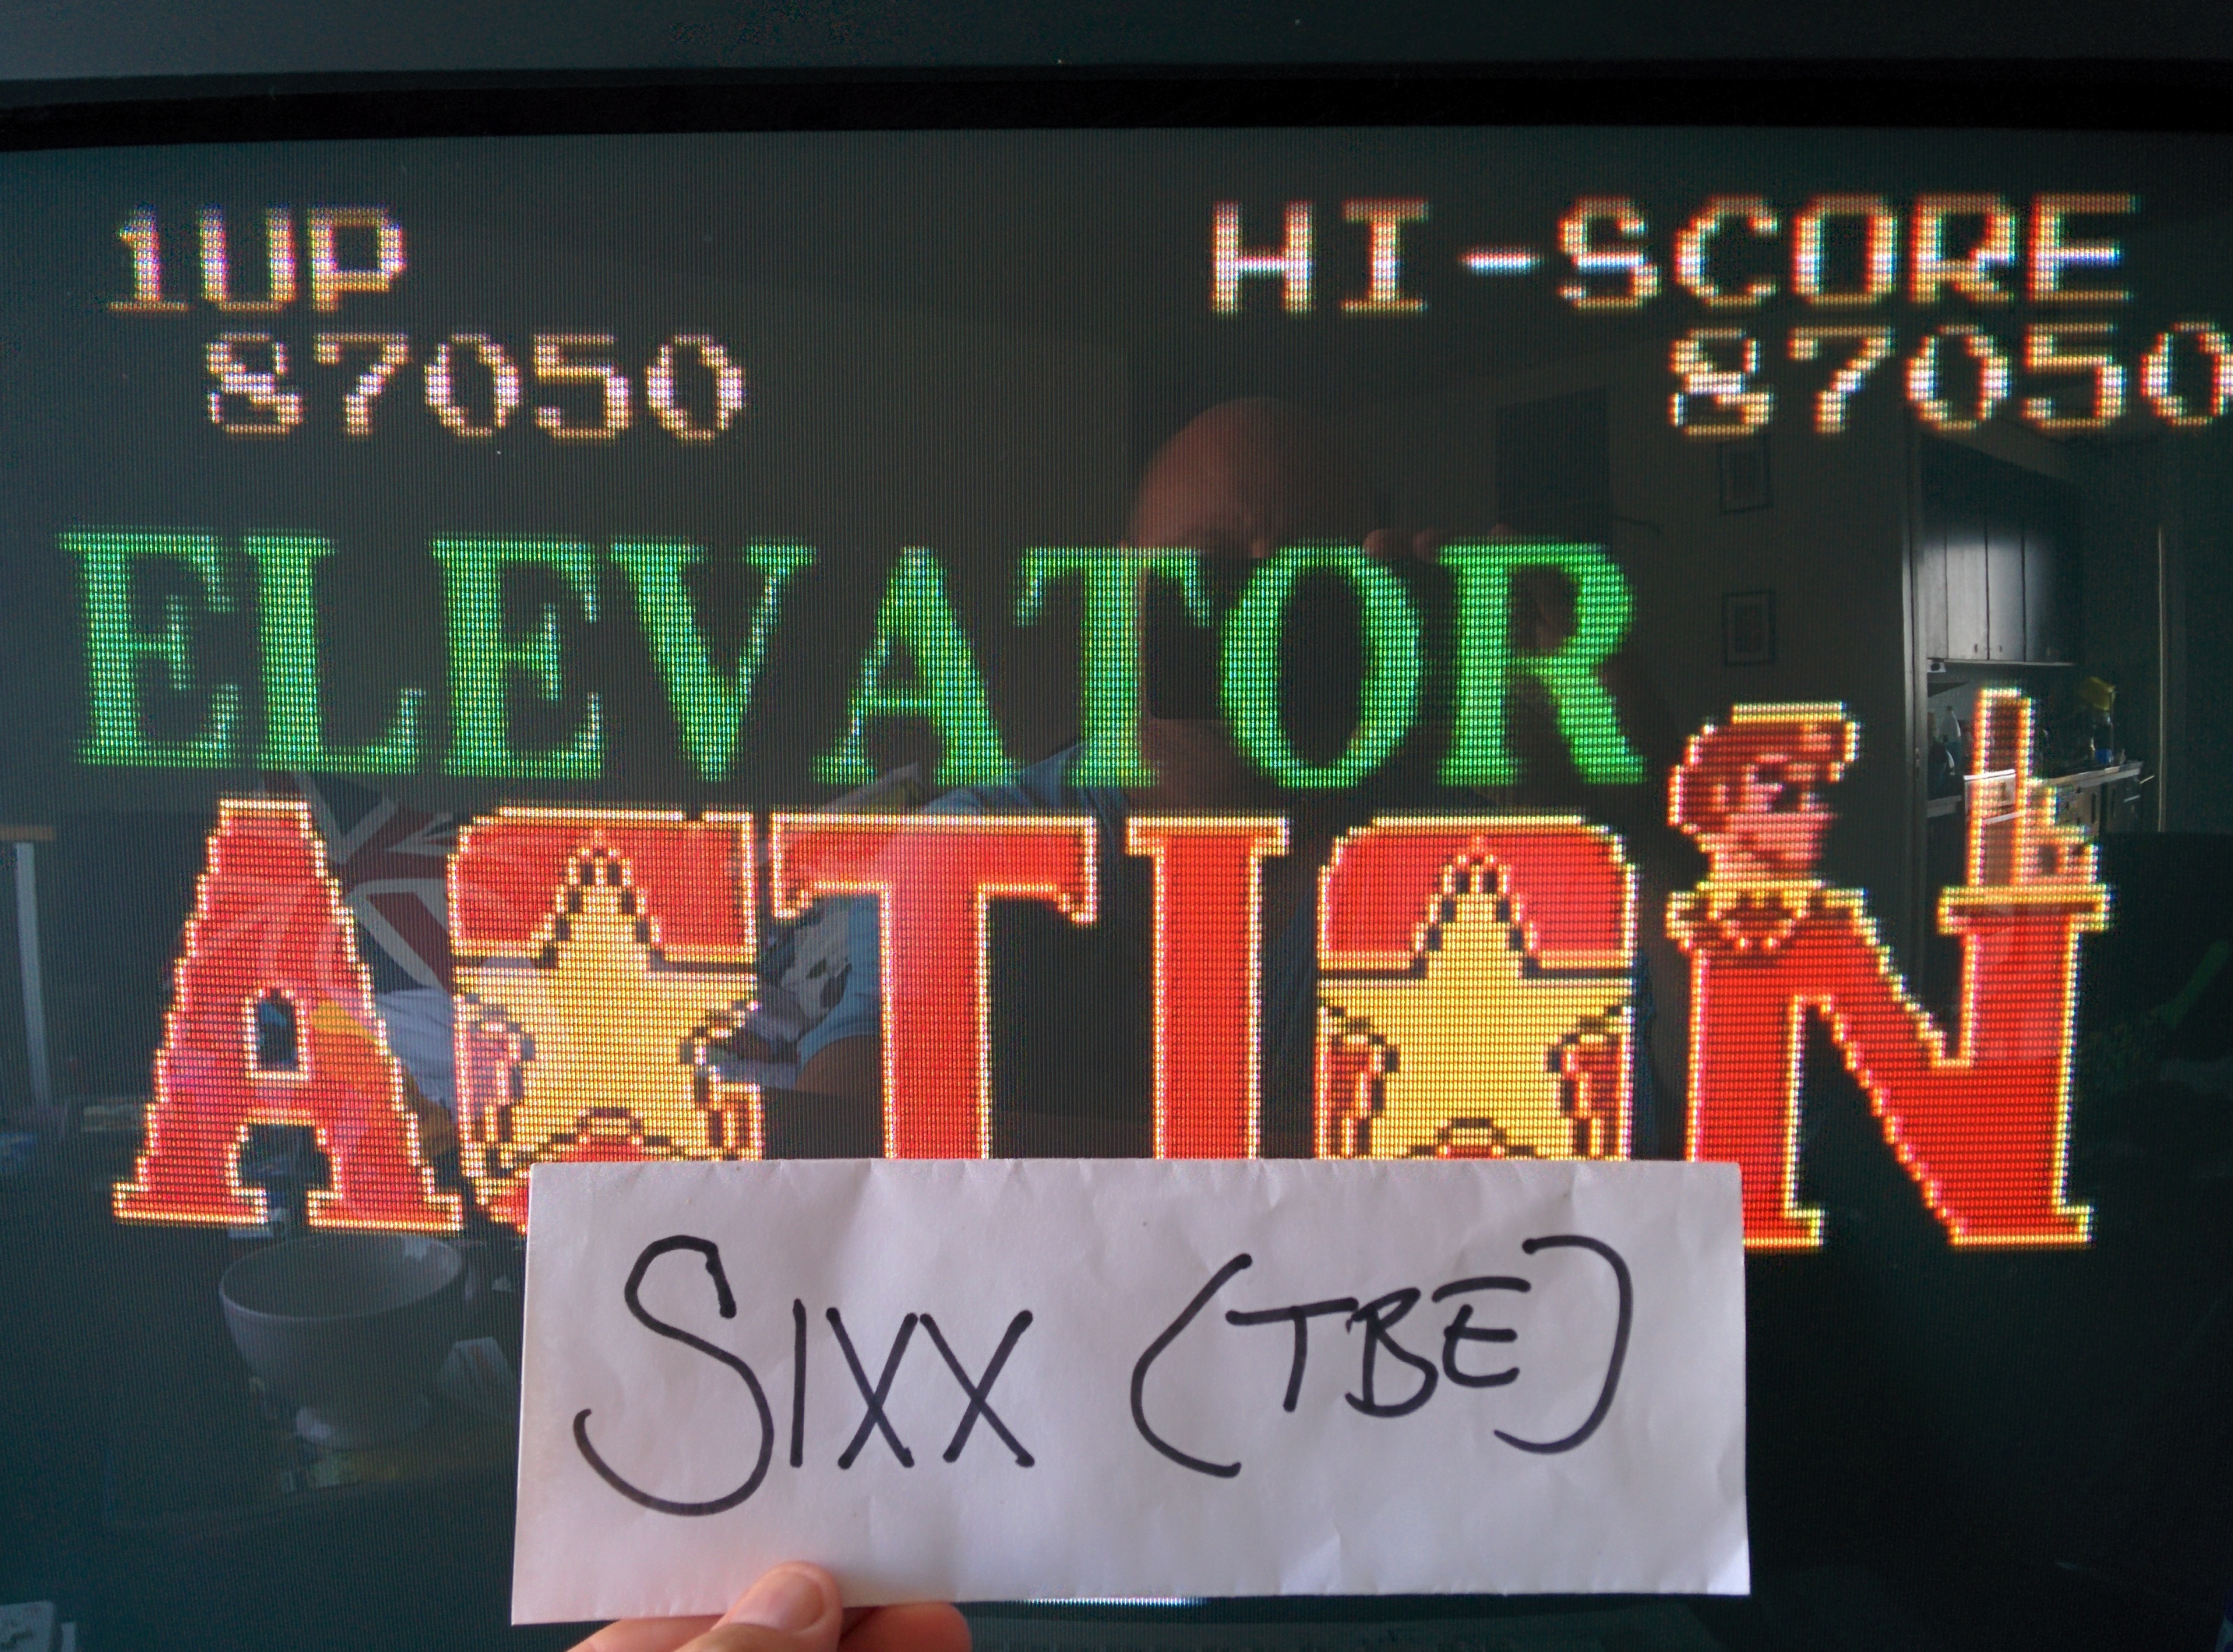 Sixx: Elevator Action (Game Boy Color Emulated) 87,050 points on 2014-07-11 04:04:29